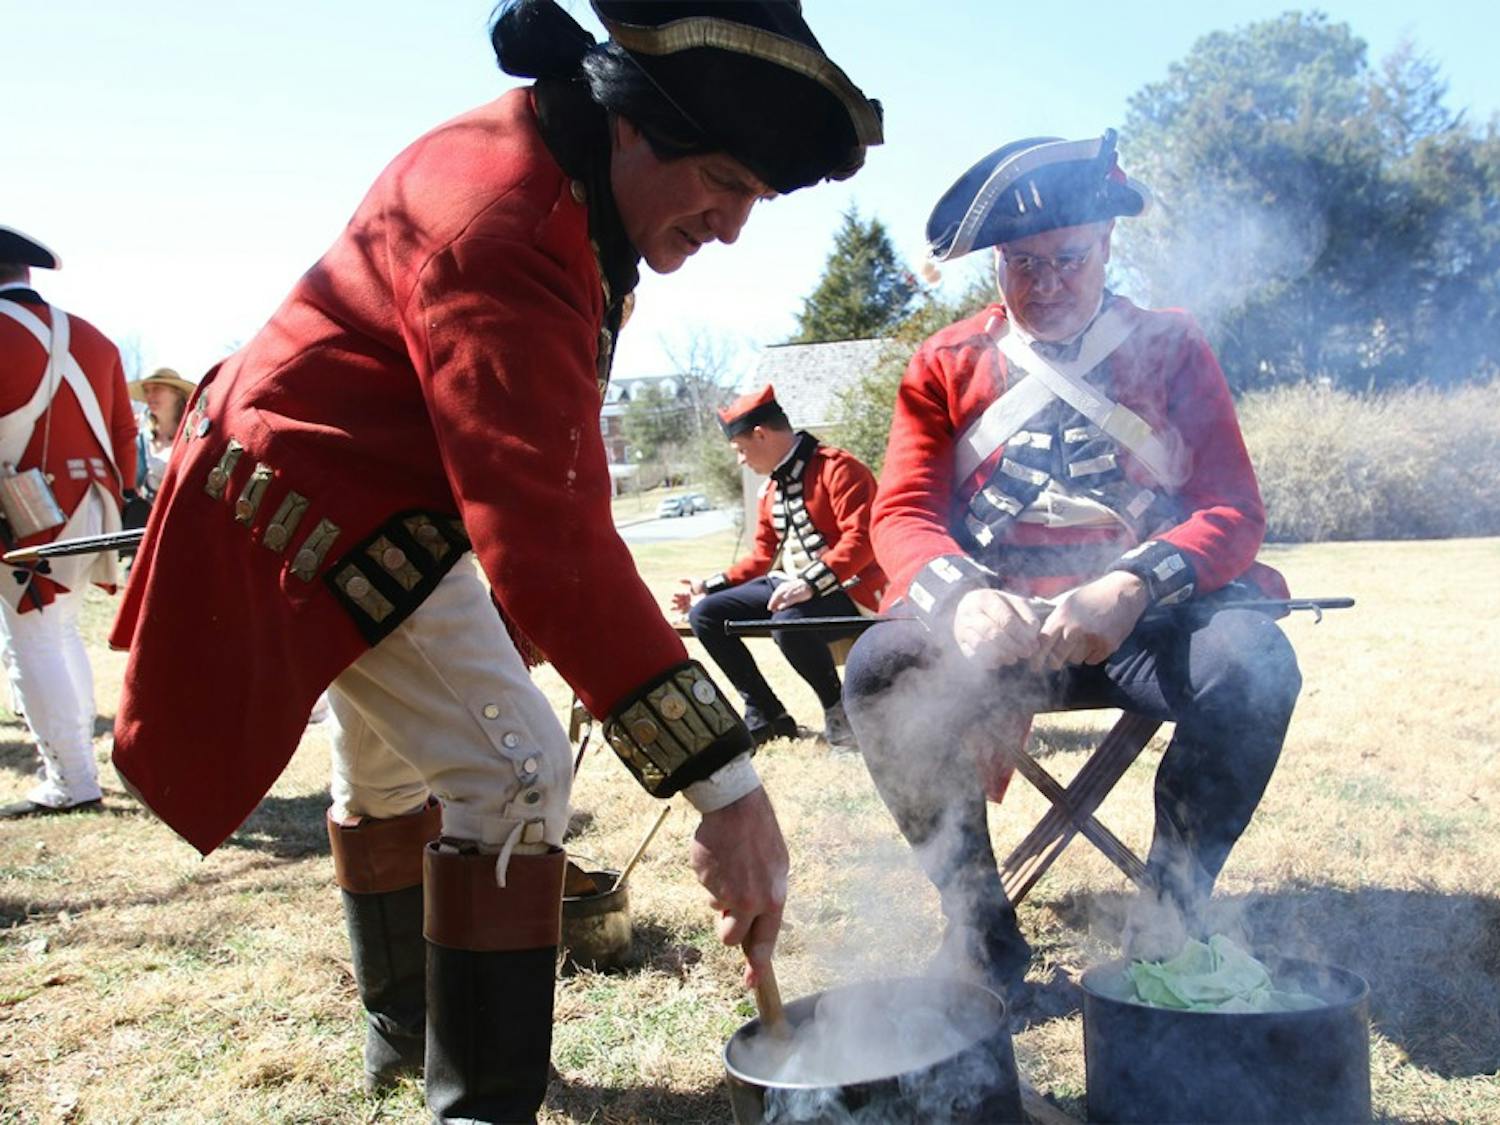 Revolutionary War reenactment as part of Twelfth Annual Revolutionary War Living History Day in Hillsborough Saturday 2-22-14. Reenactment of His Majesty's 64th regiment of foot during the year of 1781. Right-  Mark Dappert is from Charlotte, reenacting a Sgt., been reenacting for 25 years. Here he is cooking "spotted dog," salt pork and cabbage.Left- David Snyder is from Efland, reenacting a Captain of Infantry, been reenacting since 1976 and started because of the bicentennial. He has an interest in American history and wanted to learn more about the British side of the story. 